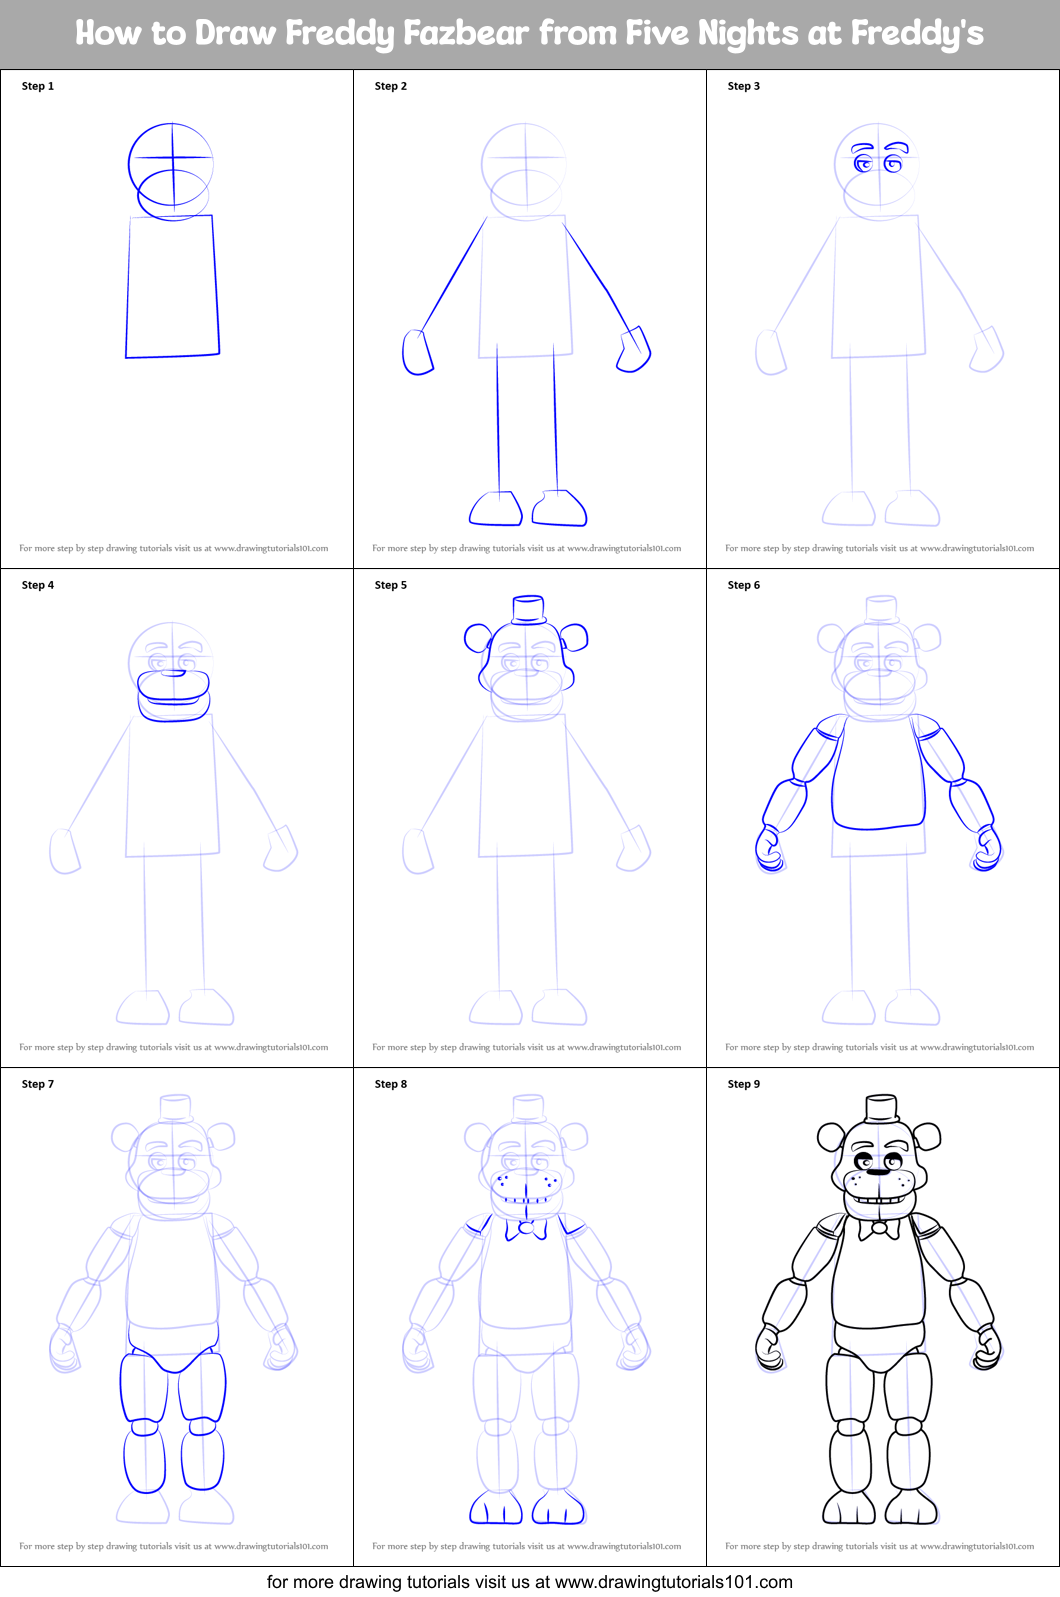 How to Draw Freddy Fazbear from Five Nights at Freddy's printable step